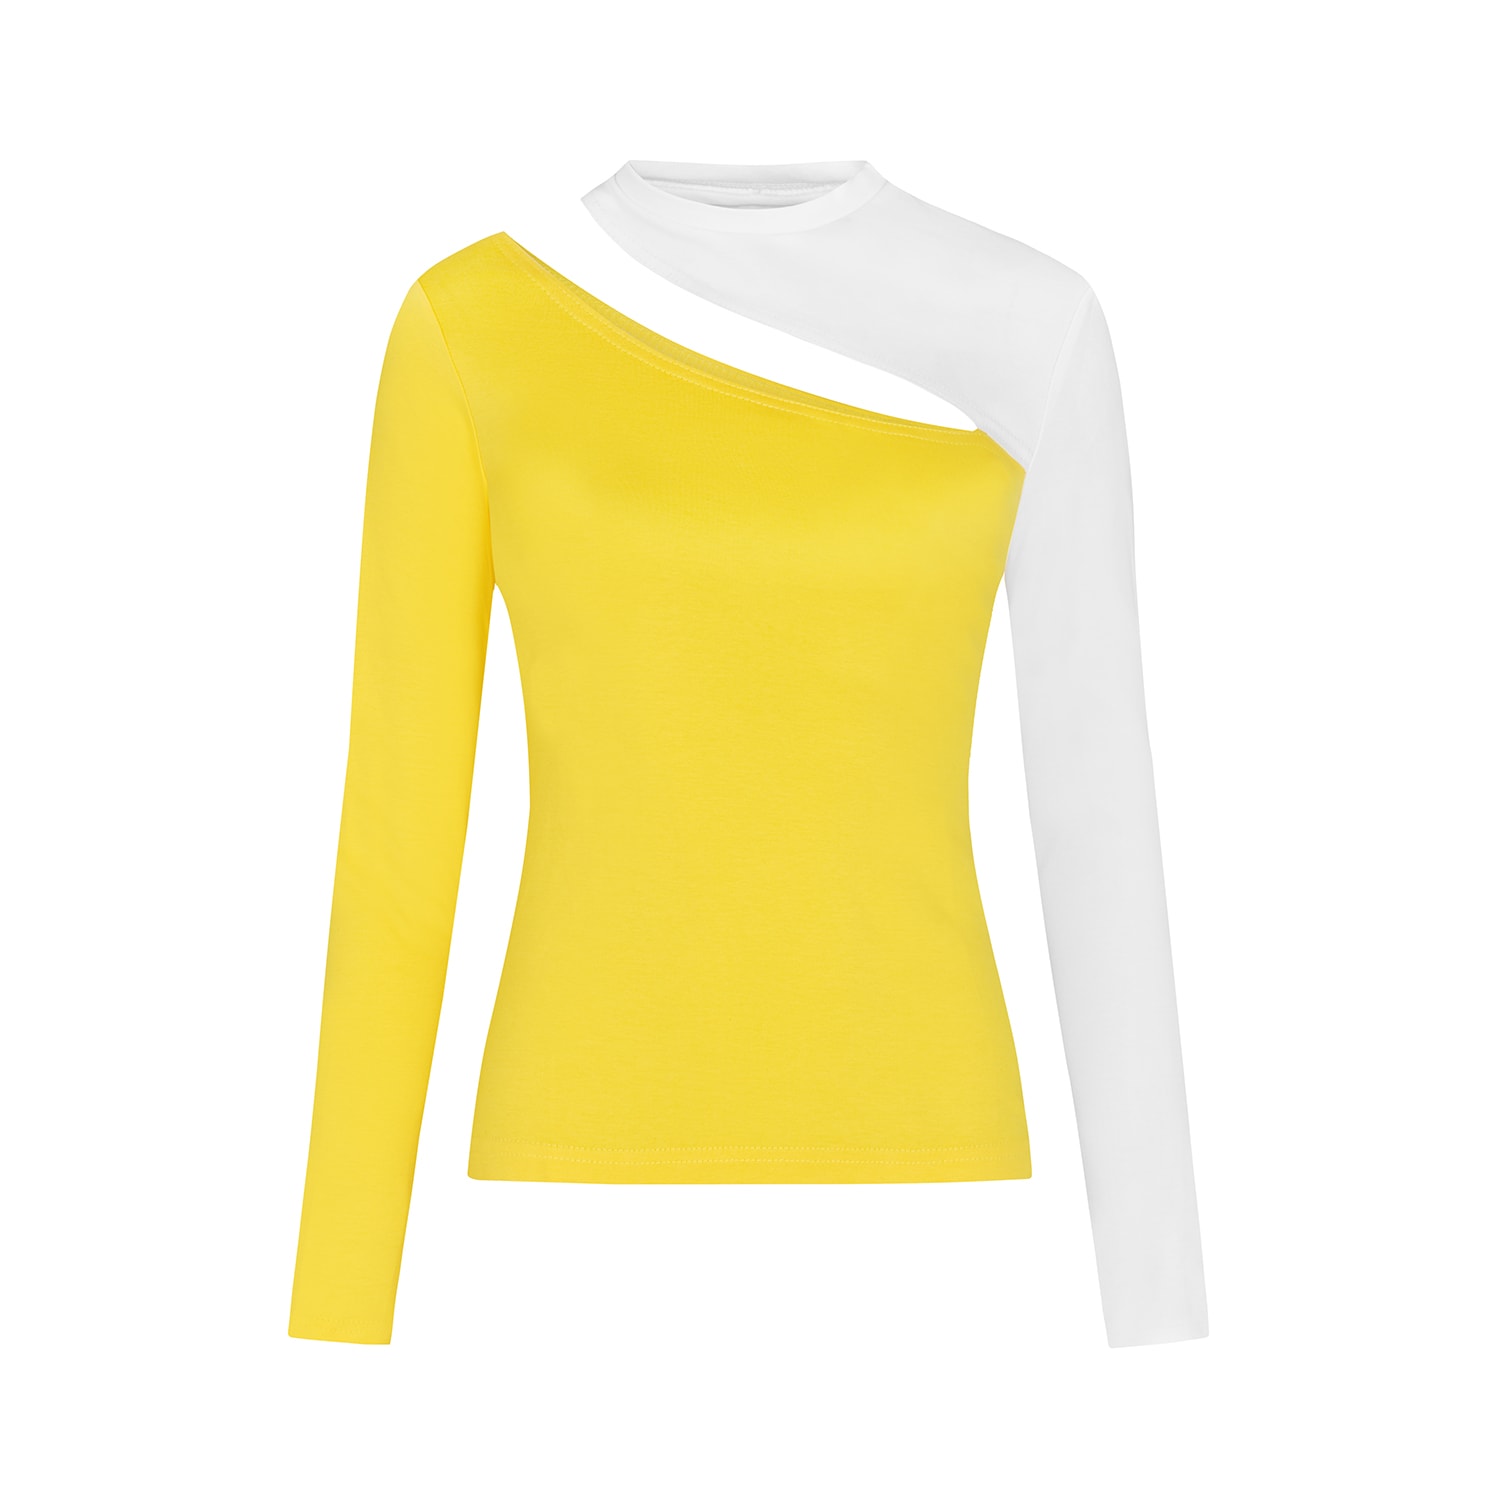 Women’s Yellow / Orange / White Vanity Slitted Jersey Top In Yellow And White Extra Small Blonde Gone Rogue